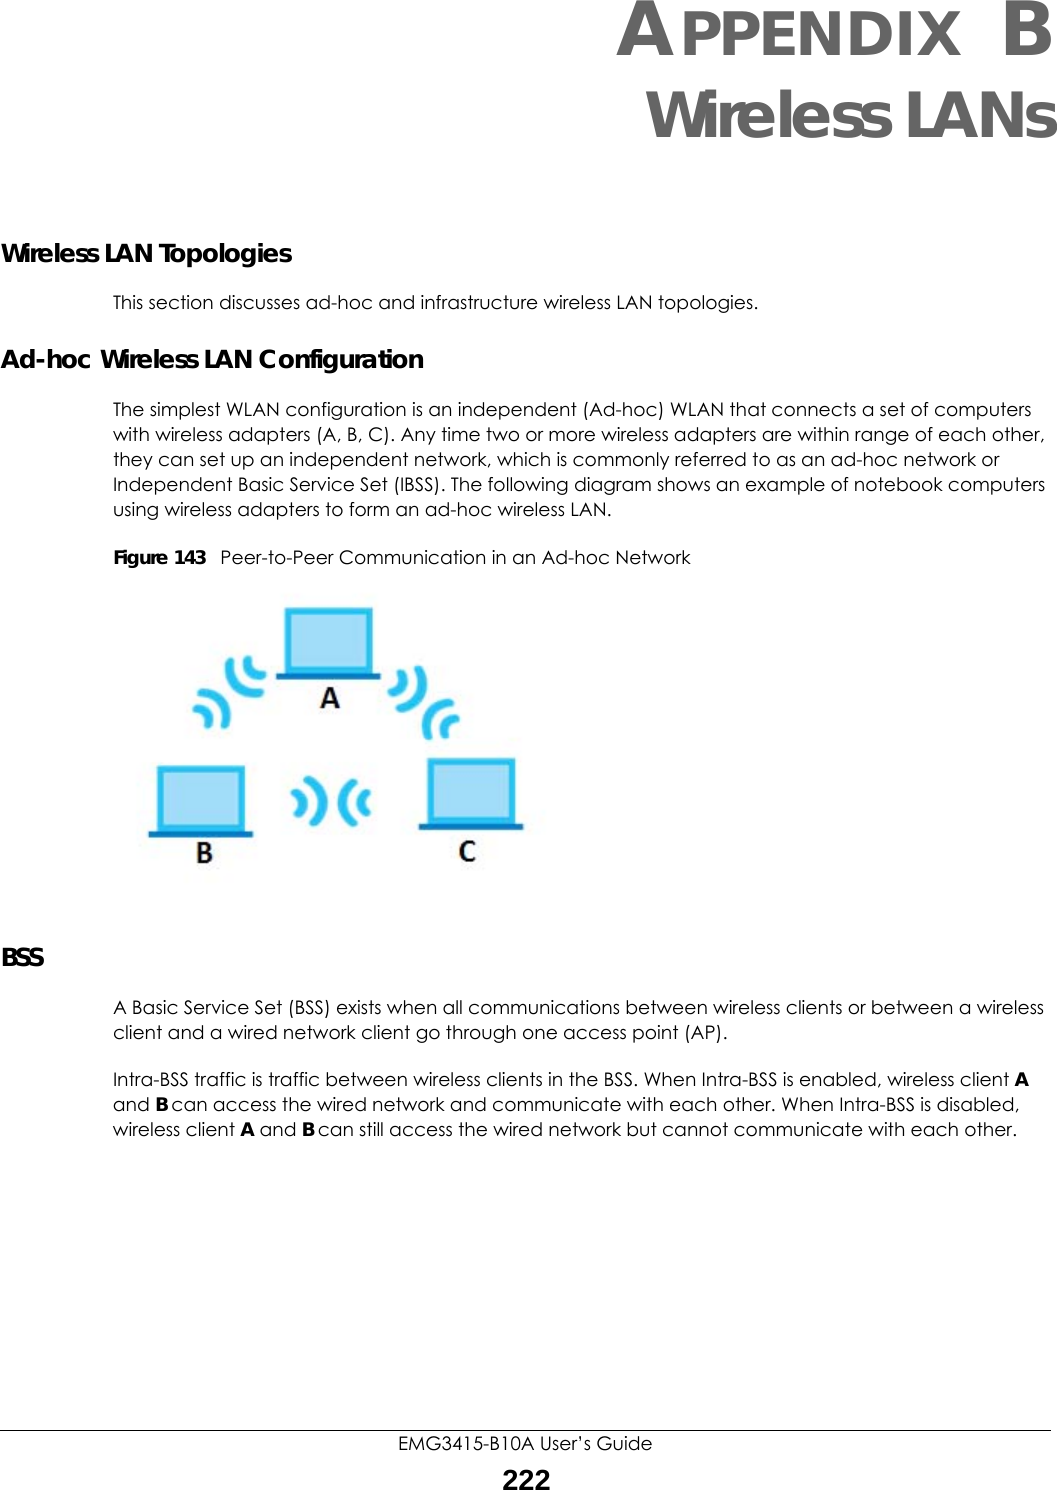 EMG3415-B10A User’s Guide222APPENDIX BWireless LANsWireless LAN TopologiesThis section discusses ad-hoc and infrastructure wireless LAN topologies.Ad-hoc Wireless LAN ConfigurationThe simplest WLAN configuration is an independent (Ad-hoc) WLAN that connects a set of computers with wireless adapters (A, B, C). Any time two or more wireless adapters are within range of each other, they can set up an independent network, which is commonly referred to as an ad-hoc network or Independent Basic Service Set (IBSS). The following diagram shows an example of notebook computers using wireless adapters to form an ad-hoc wireless LAN. Figure 143   Peer-to-Peer Communication in an Ad-hoc NetworkBSSA Basic Service Set (BSS) exists when all communications between wireless clients or between a wireless client and a wired network client go through one access point (AP). Intra-BSS traffic is traffic between wireless clients in the BSS. When Intra-BSS is enabled, wireless client A and B can access the wired network and communicate with each other. When Intra-BSS is disabled, wireless client A and B can still access the wired network but cannot communicate with each other.